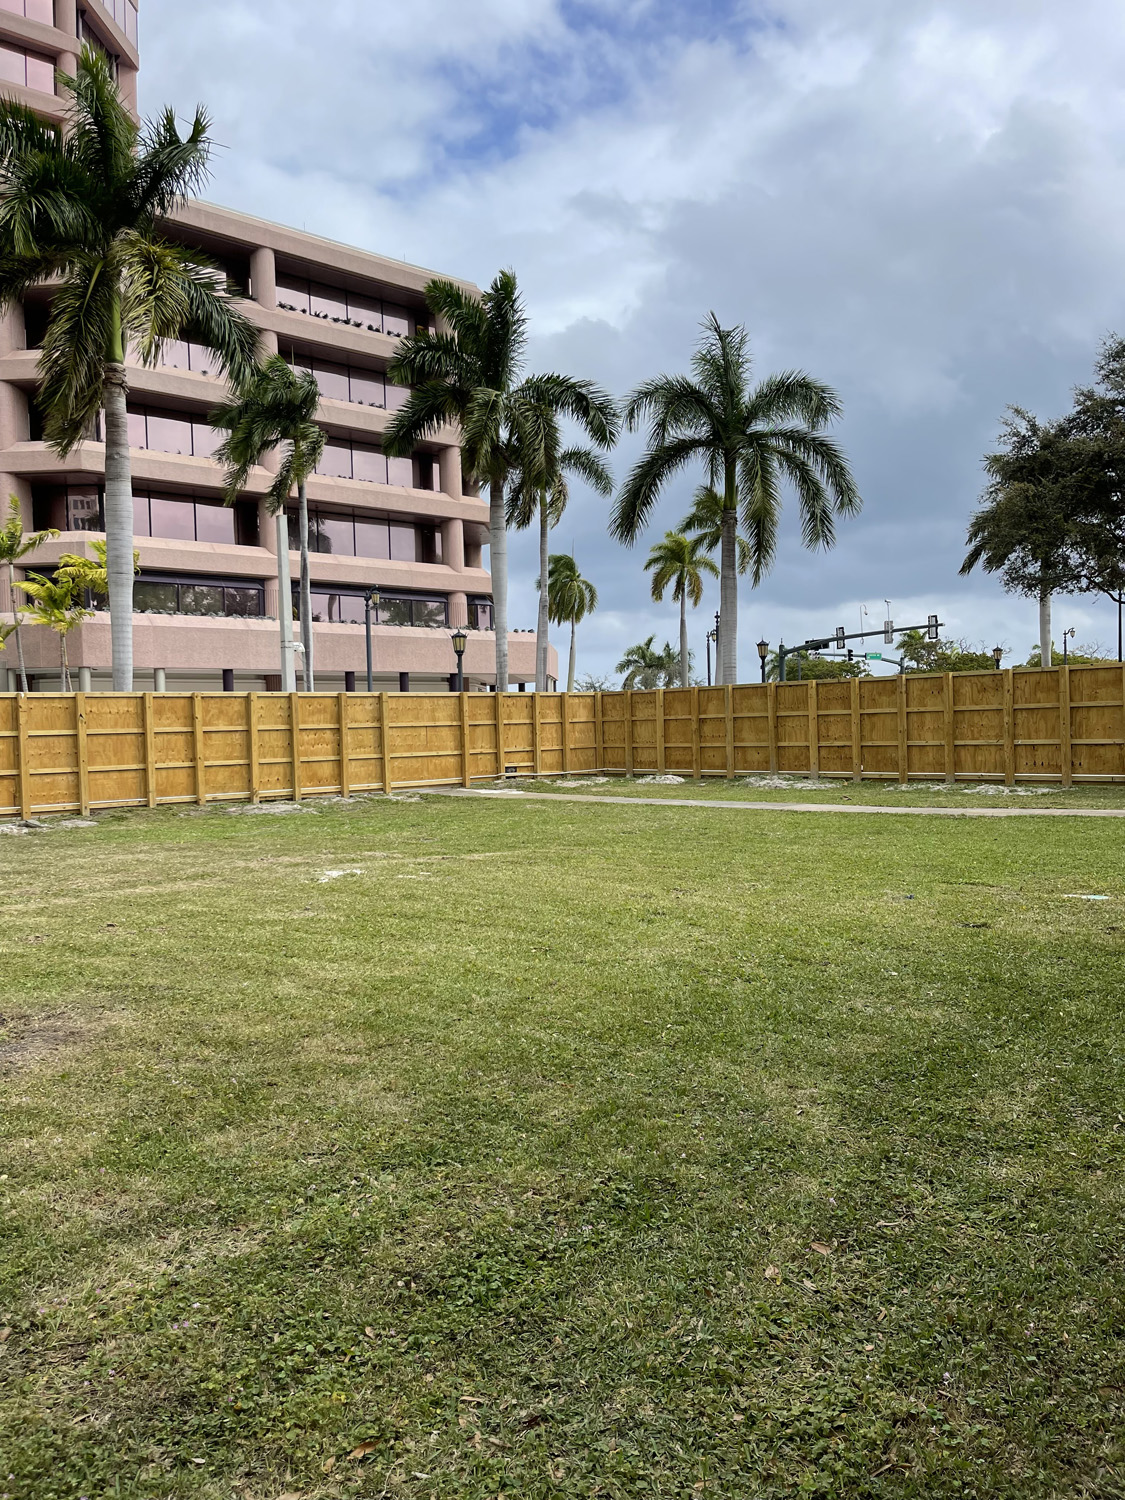 commercial fencing in florida